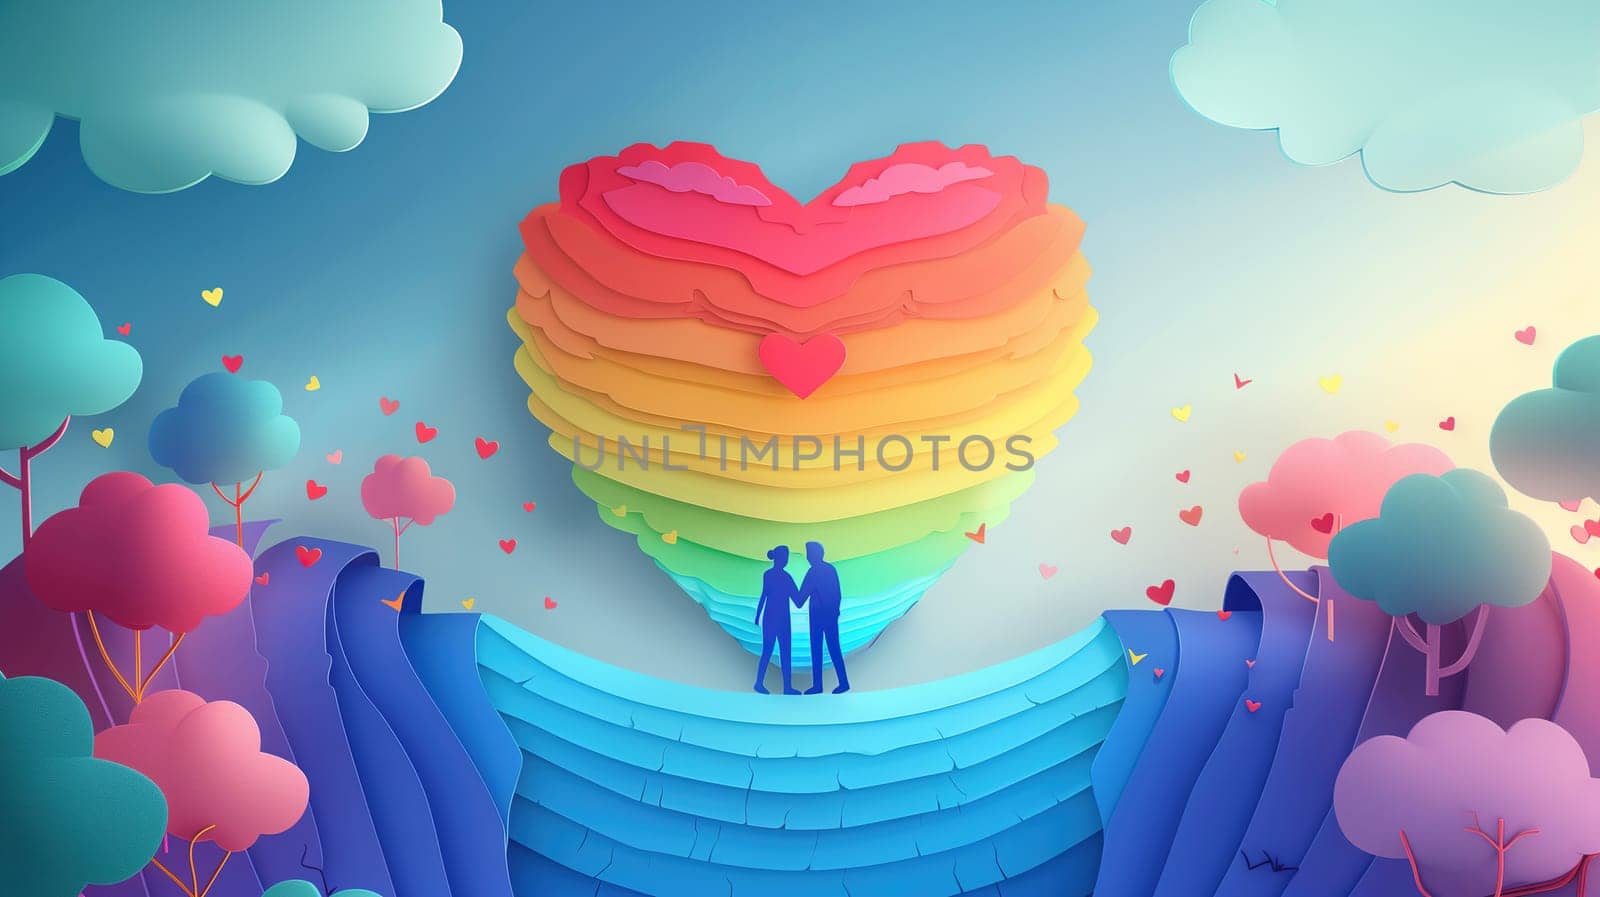 A man and a woman, representing an LGBT couple, stand together in front of a heart shaped balloon. The balloon symbolizes love and pride, making a powerful statement about acceptance and equality.